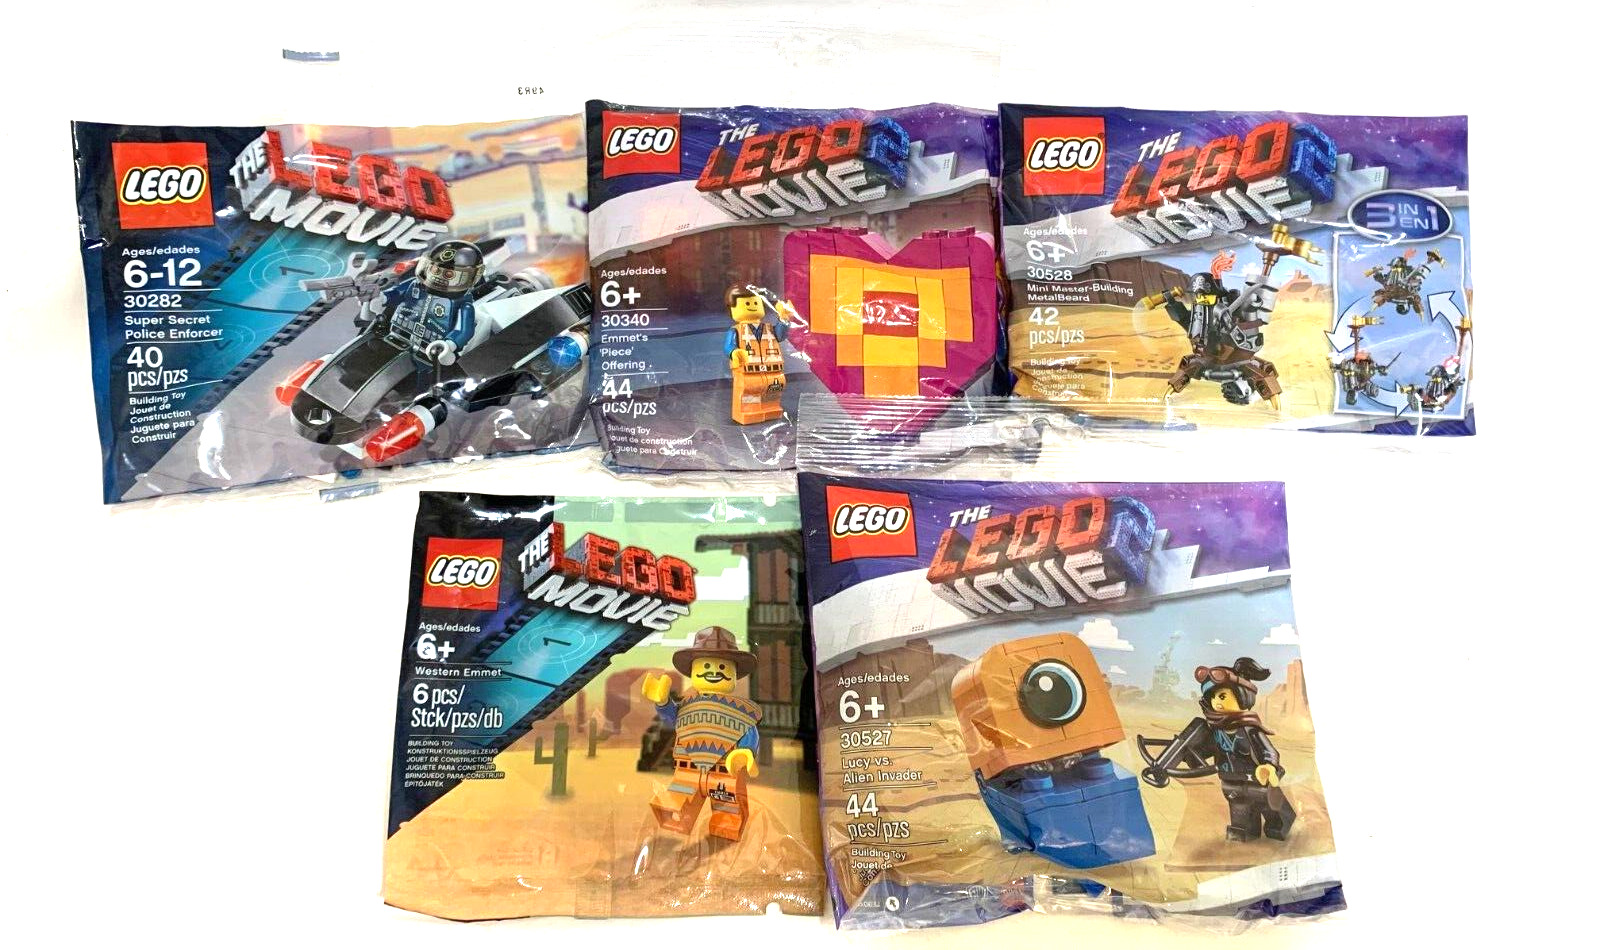 LEGO MOVIE POLYBAG lot x5 30282 30340 30528 30527 Police Western Emmet Lucy